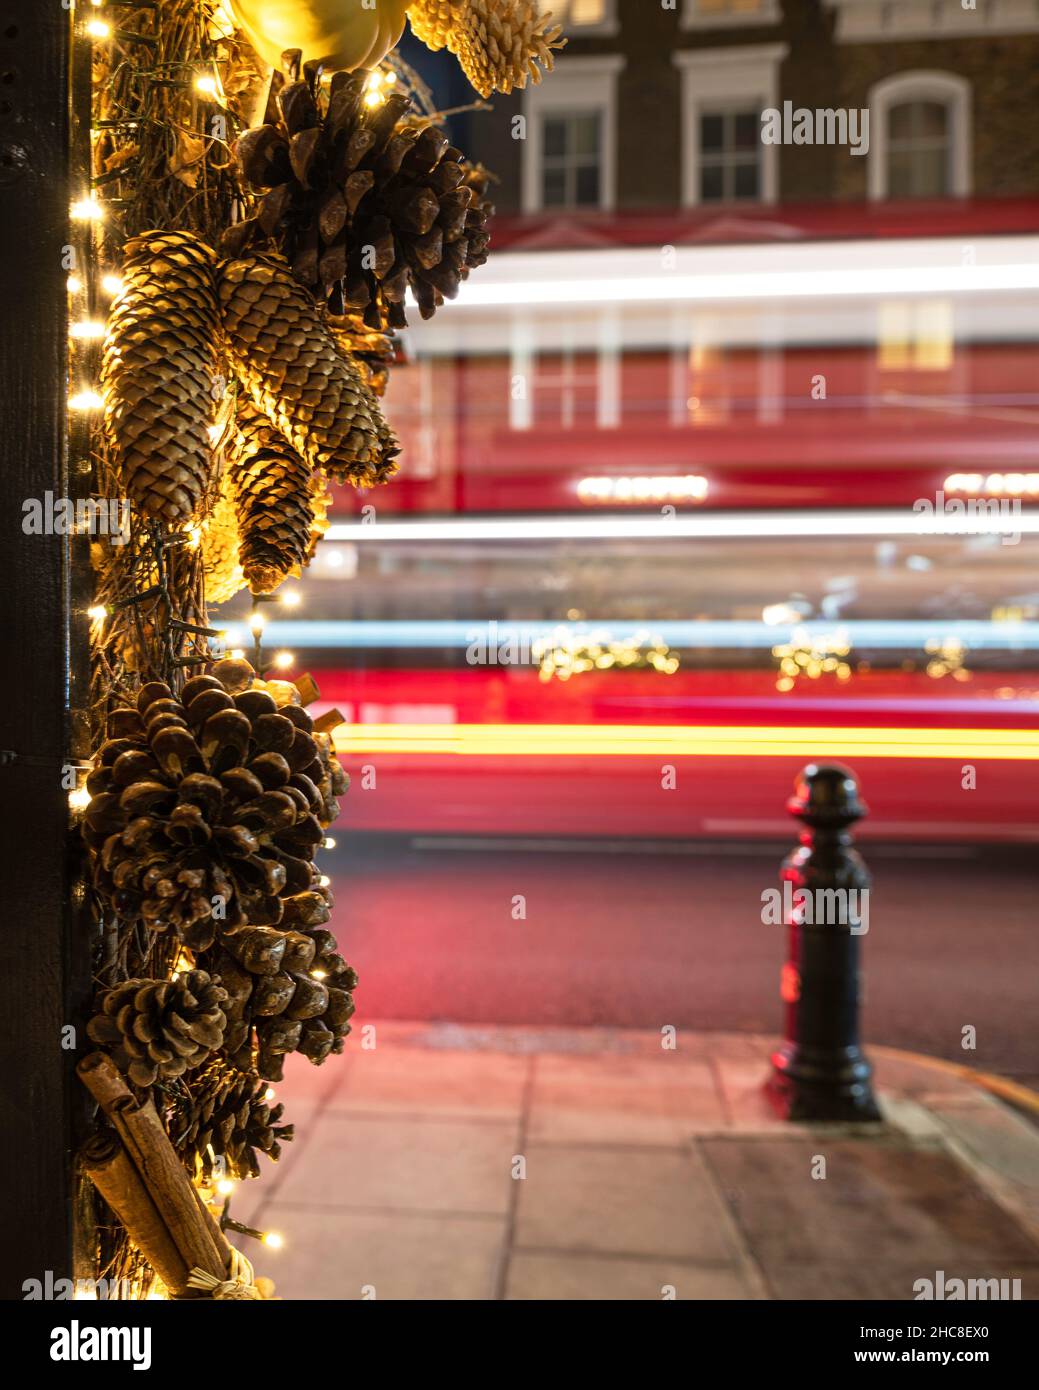 Close up of Christmas decorations with London bus trails in the background Stock Photo